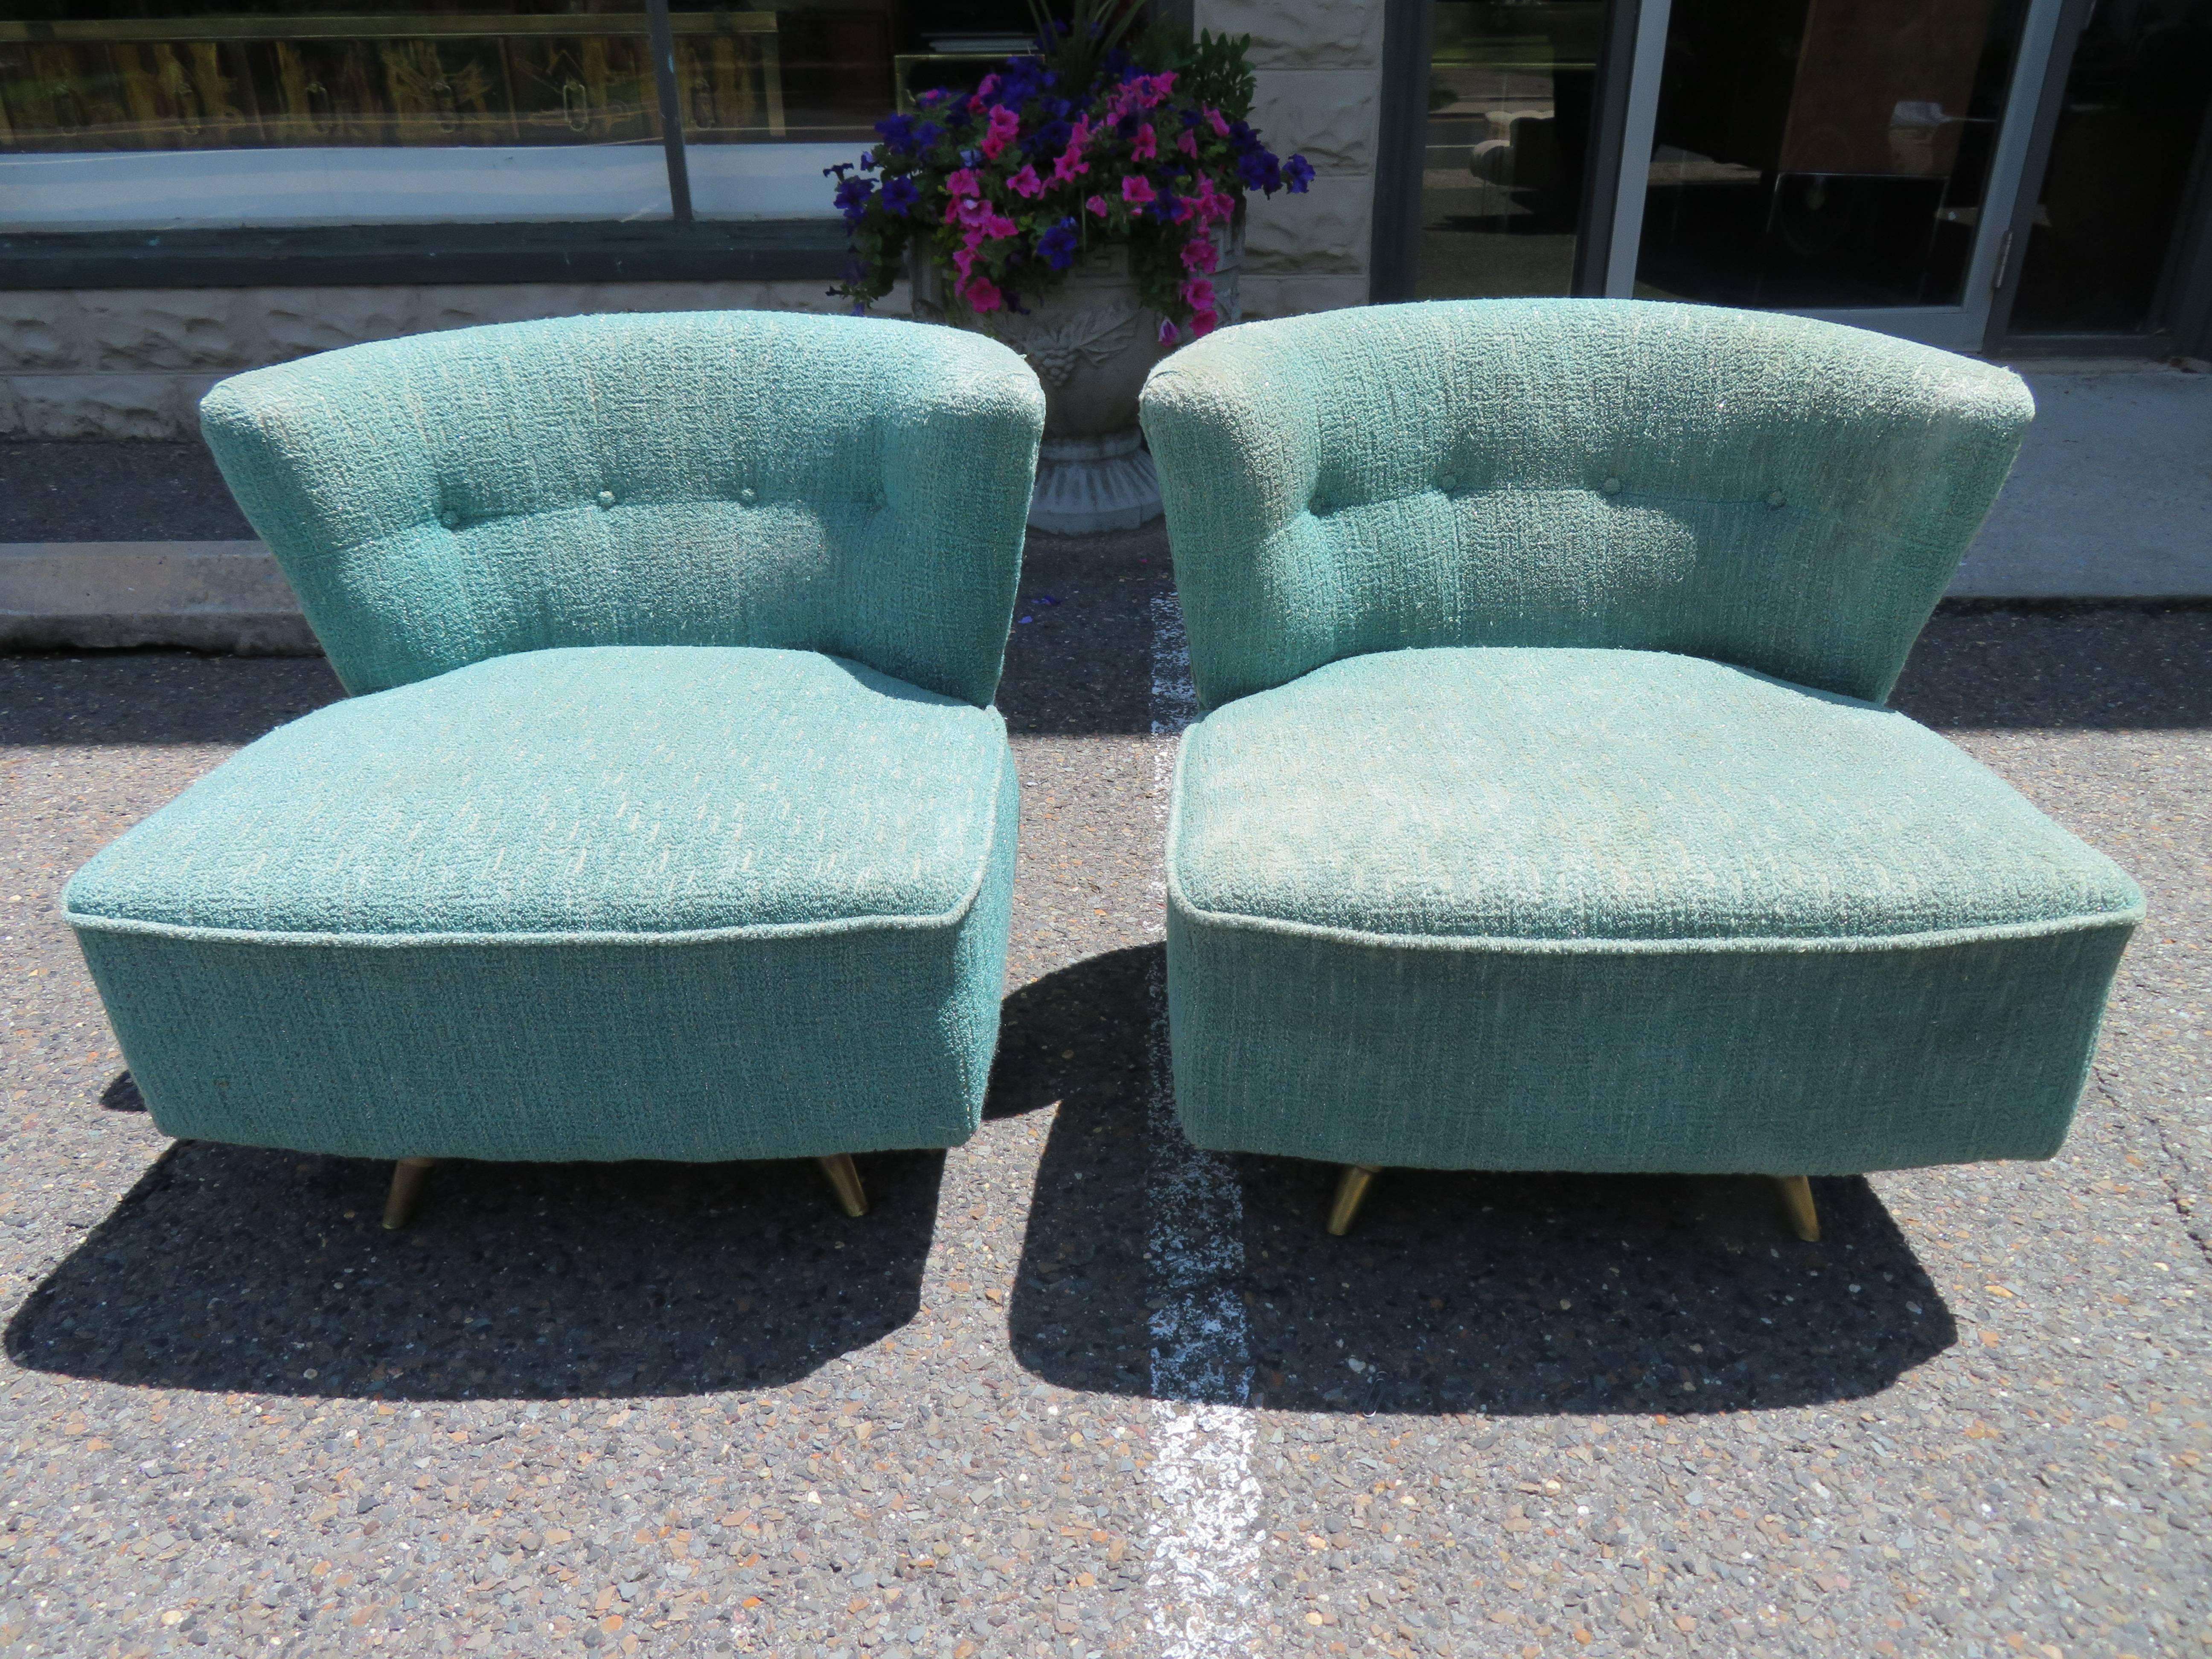 Fabulous pair of Kroehler, 1950s swivel chairs. These chairs retain their original fabric and will need to be re-upholstered but that's what you designers are looking for anyway-right? I personally love the color they are but one designer on 1stdibs